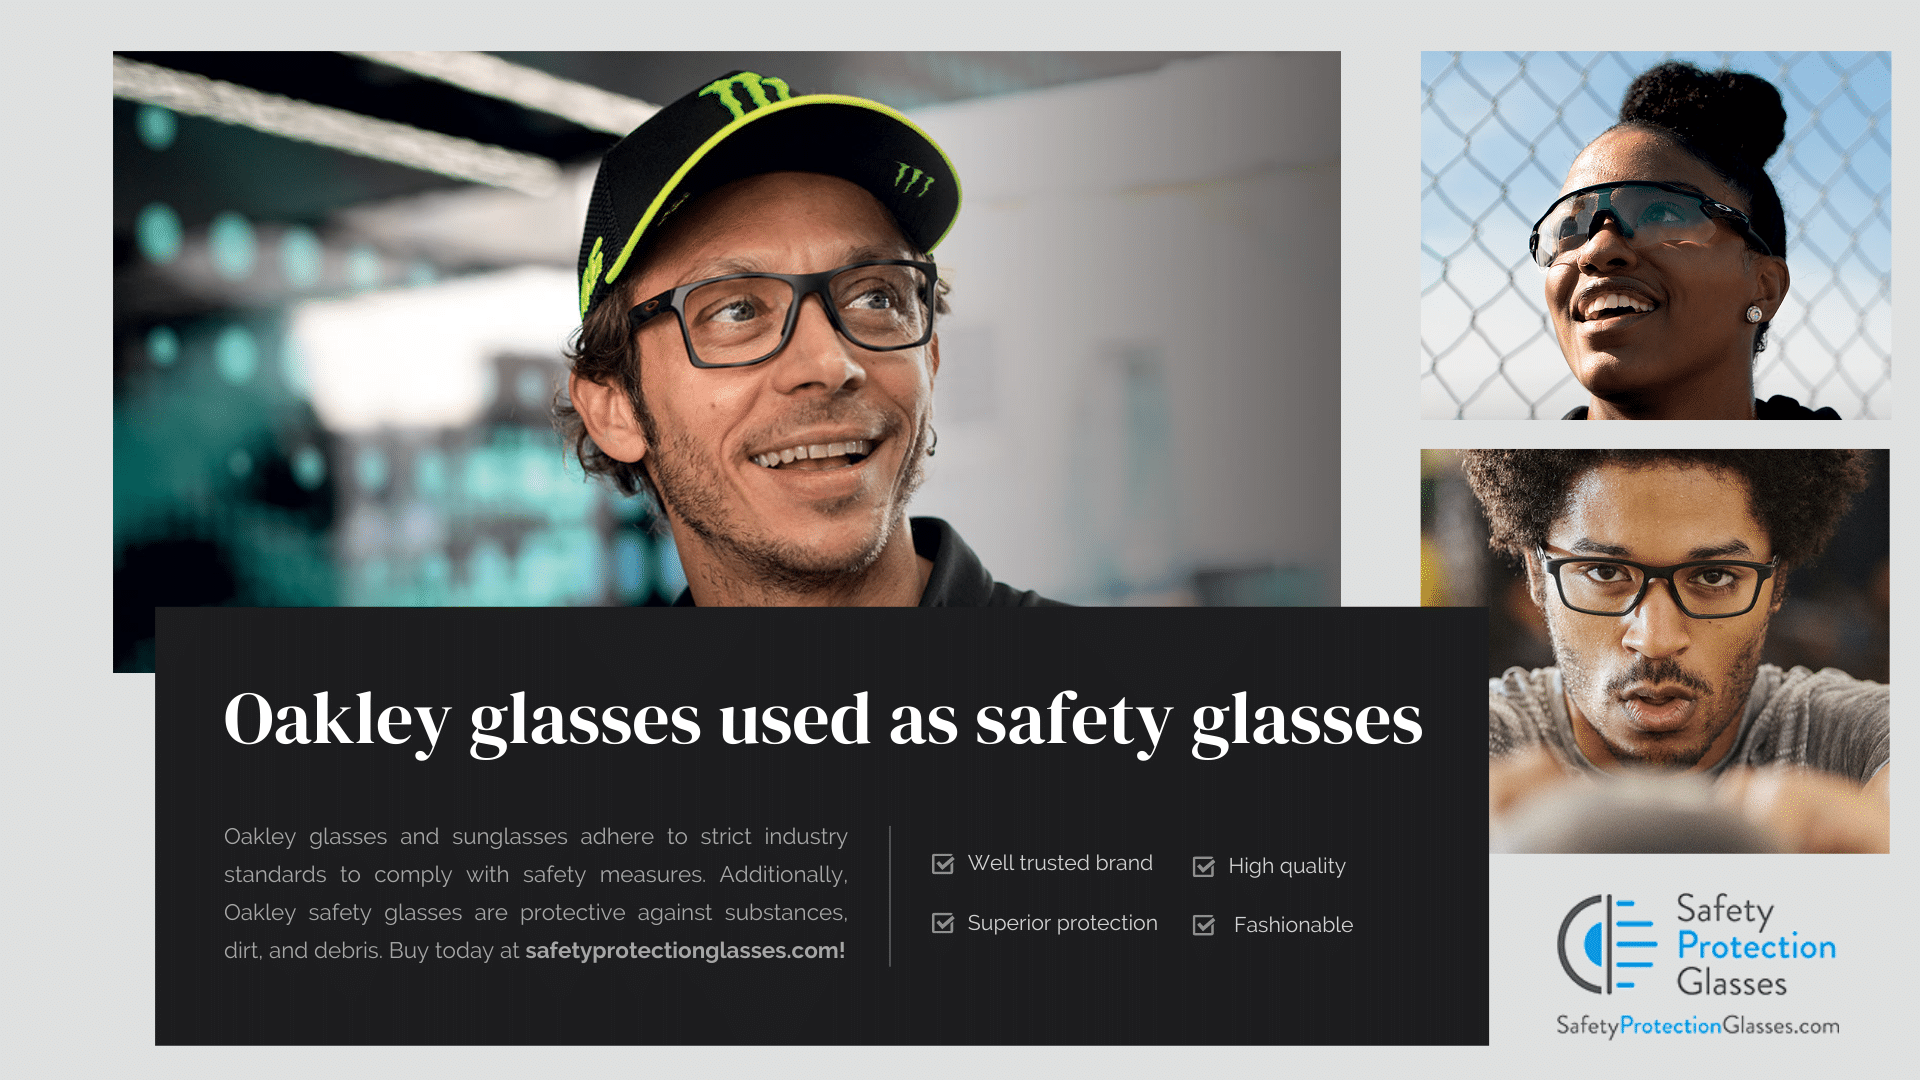 Can Oakley glasses be used as safety glasses? - Safety Protection Glasses